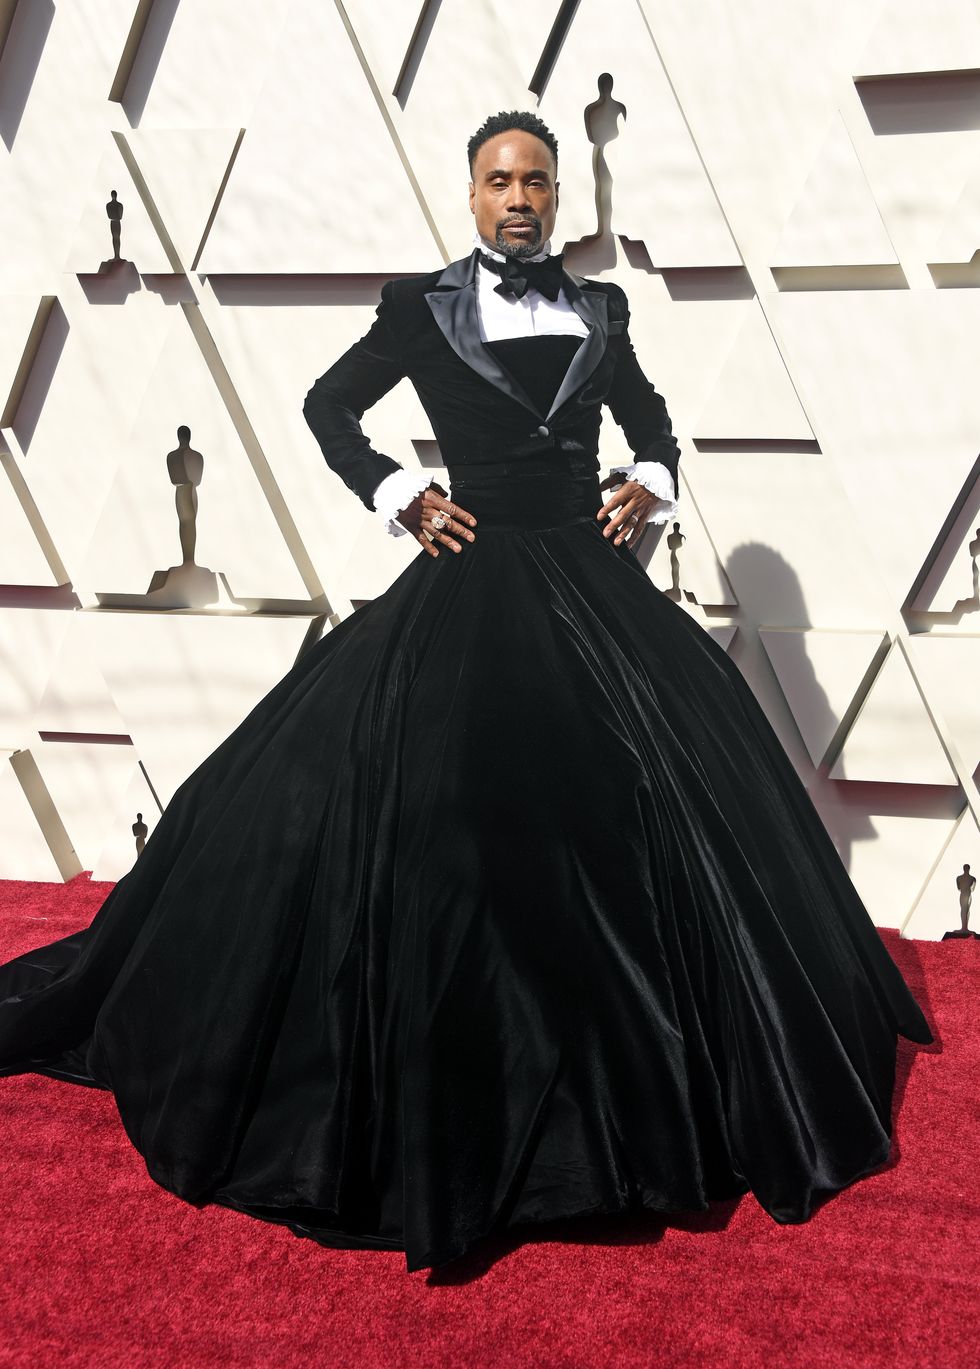 https://hips.hearstapps.com/hmg-prod/images/billy-porter-attends-the-91st-annual-academy-awards-at-news-photo-1576078514.jpg?crop=1xw:1xh;center,top&resize=980:*